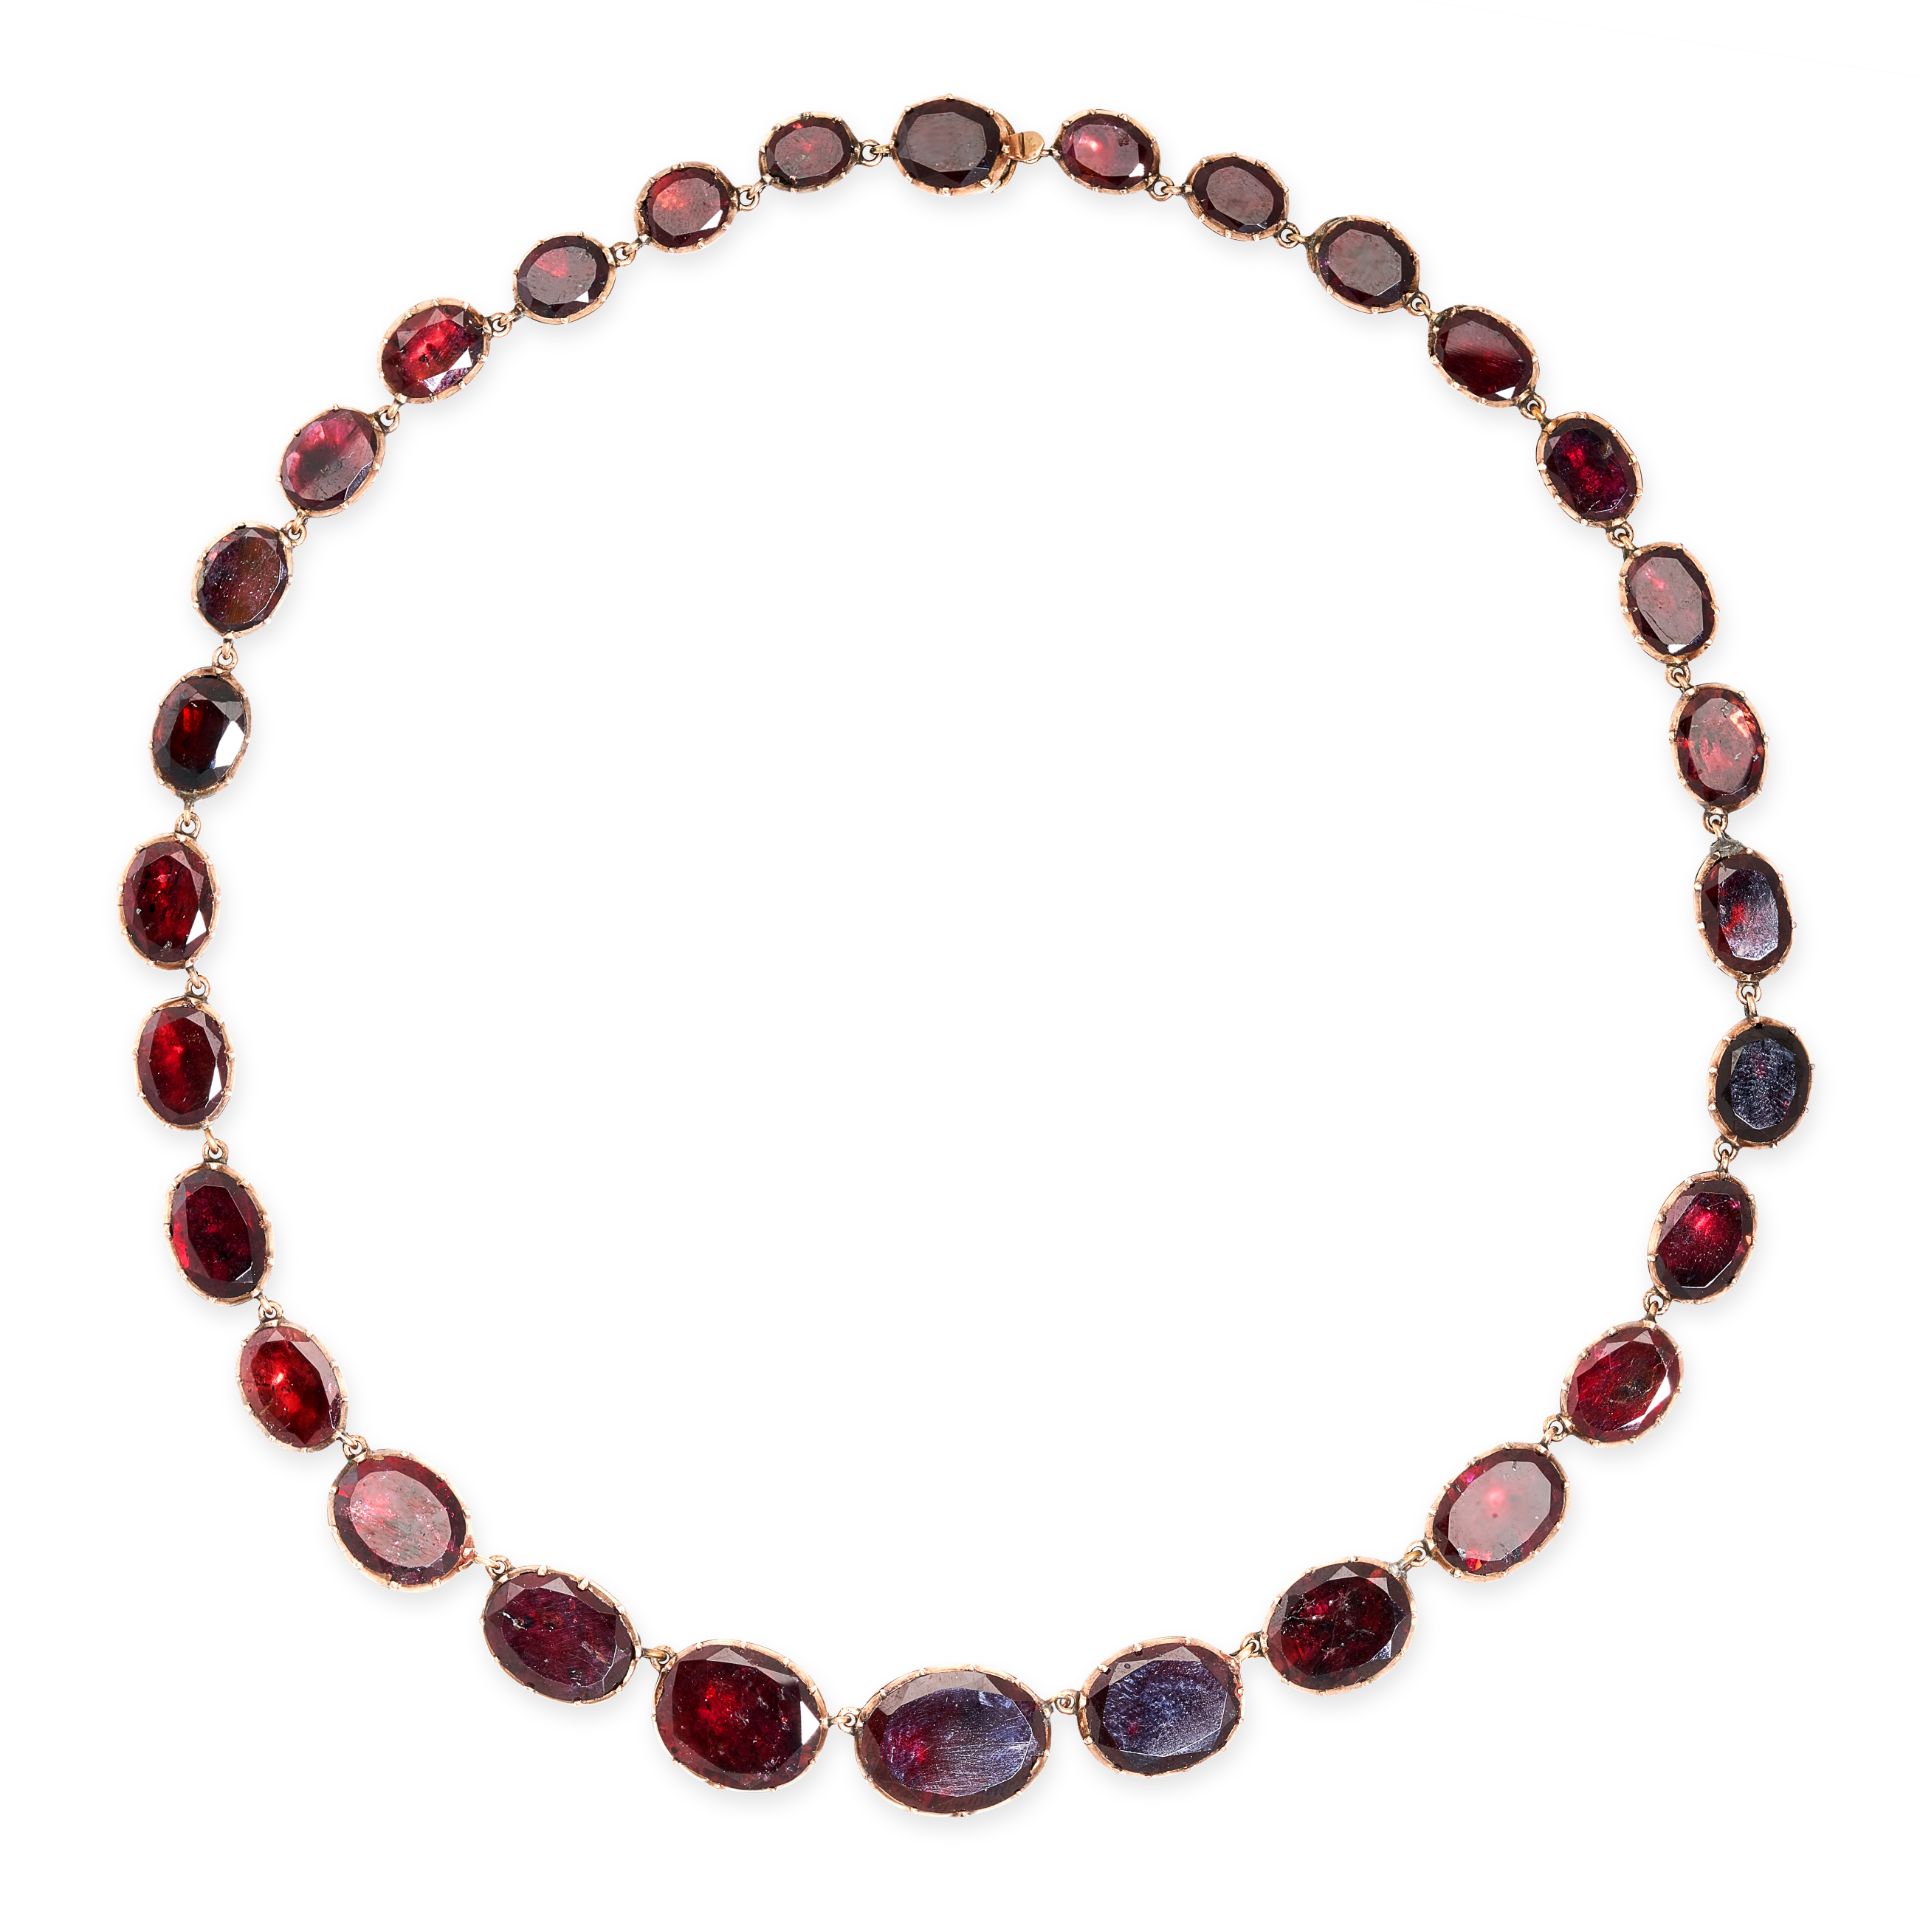 AN ANTIQUE GARNET RIVIERE NECKLACE, 19TH CENTURY in yellow gold, comprising a single row of thirty